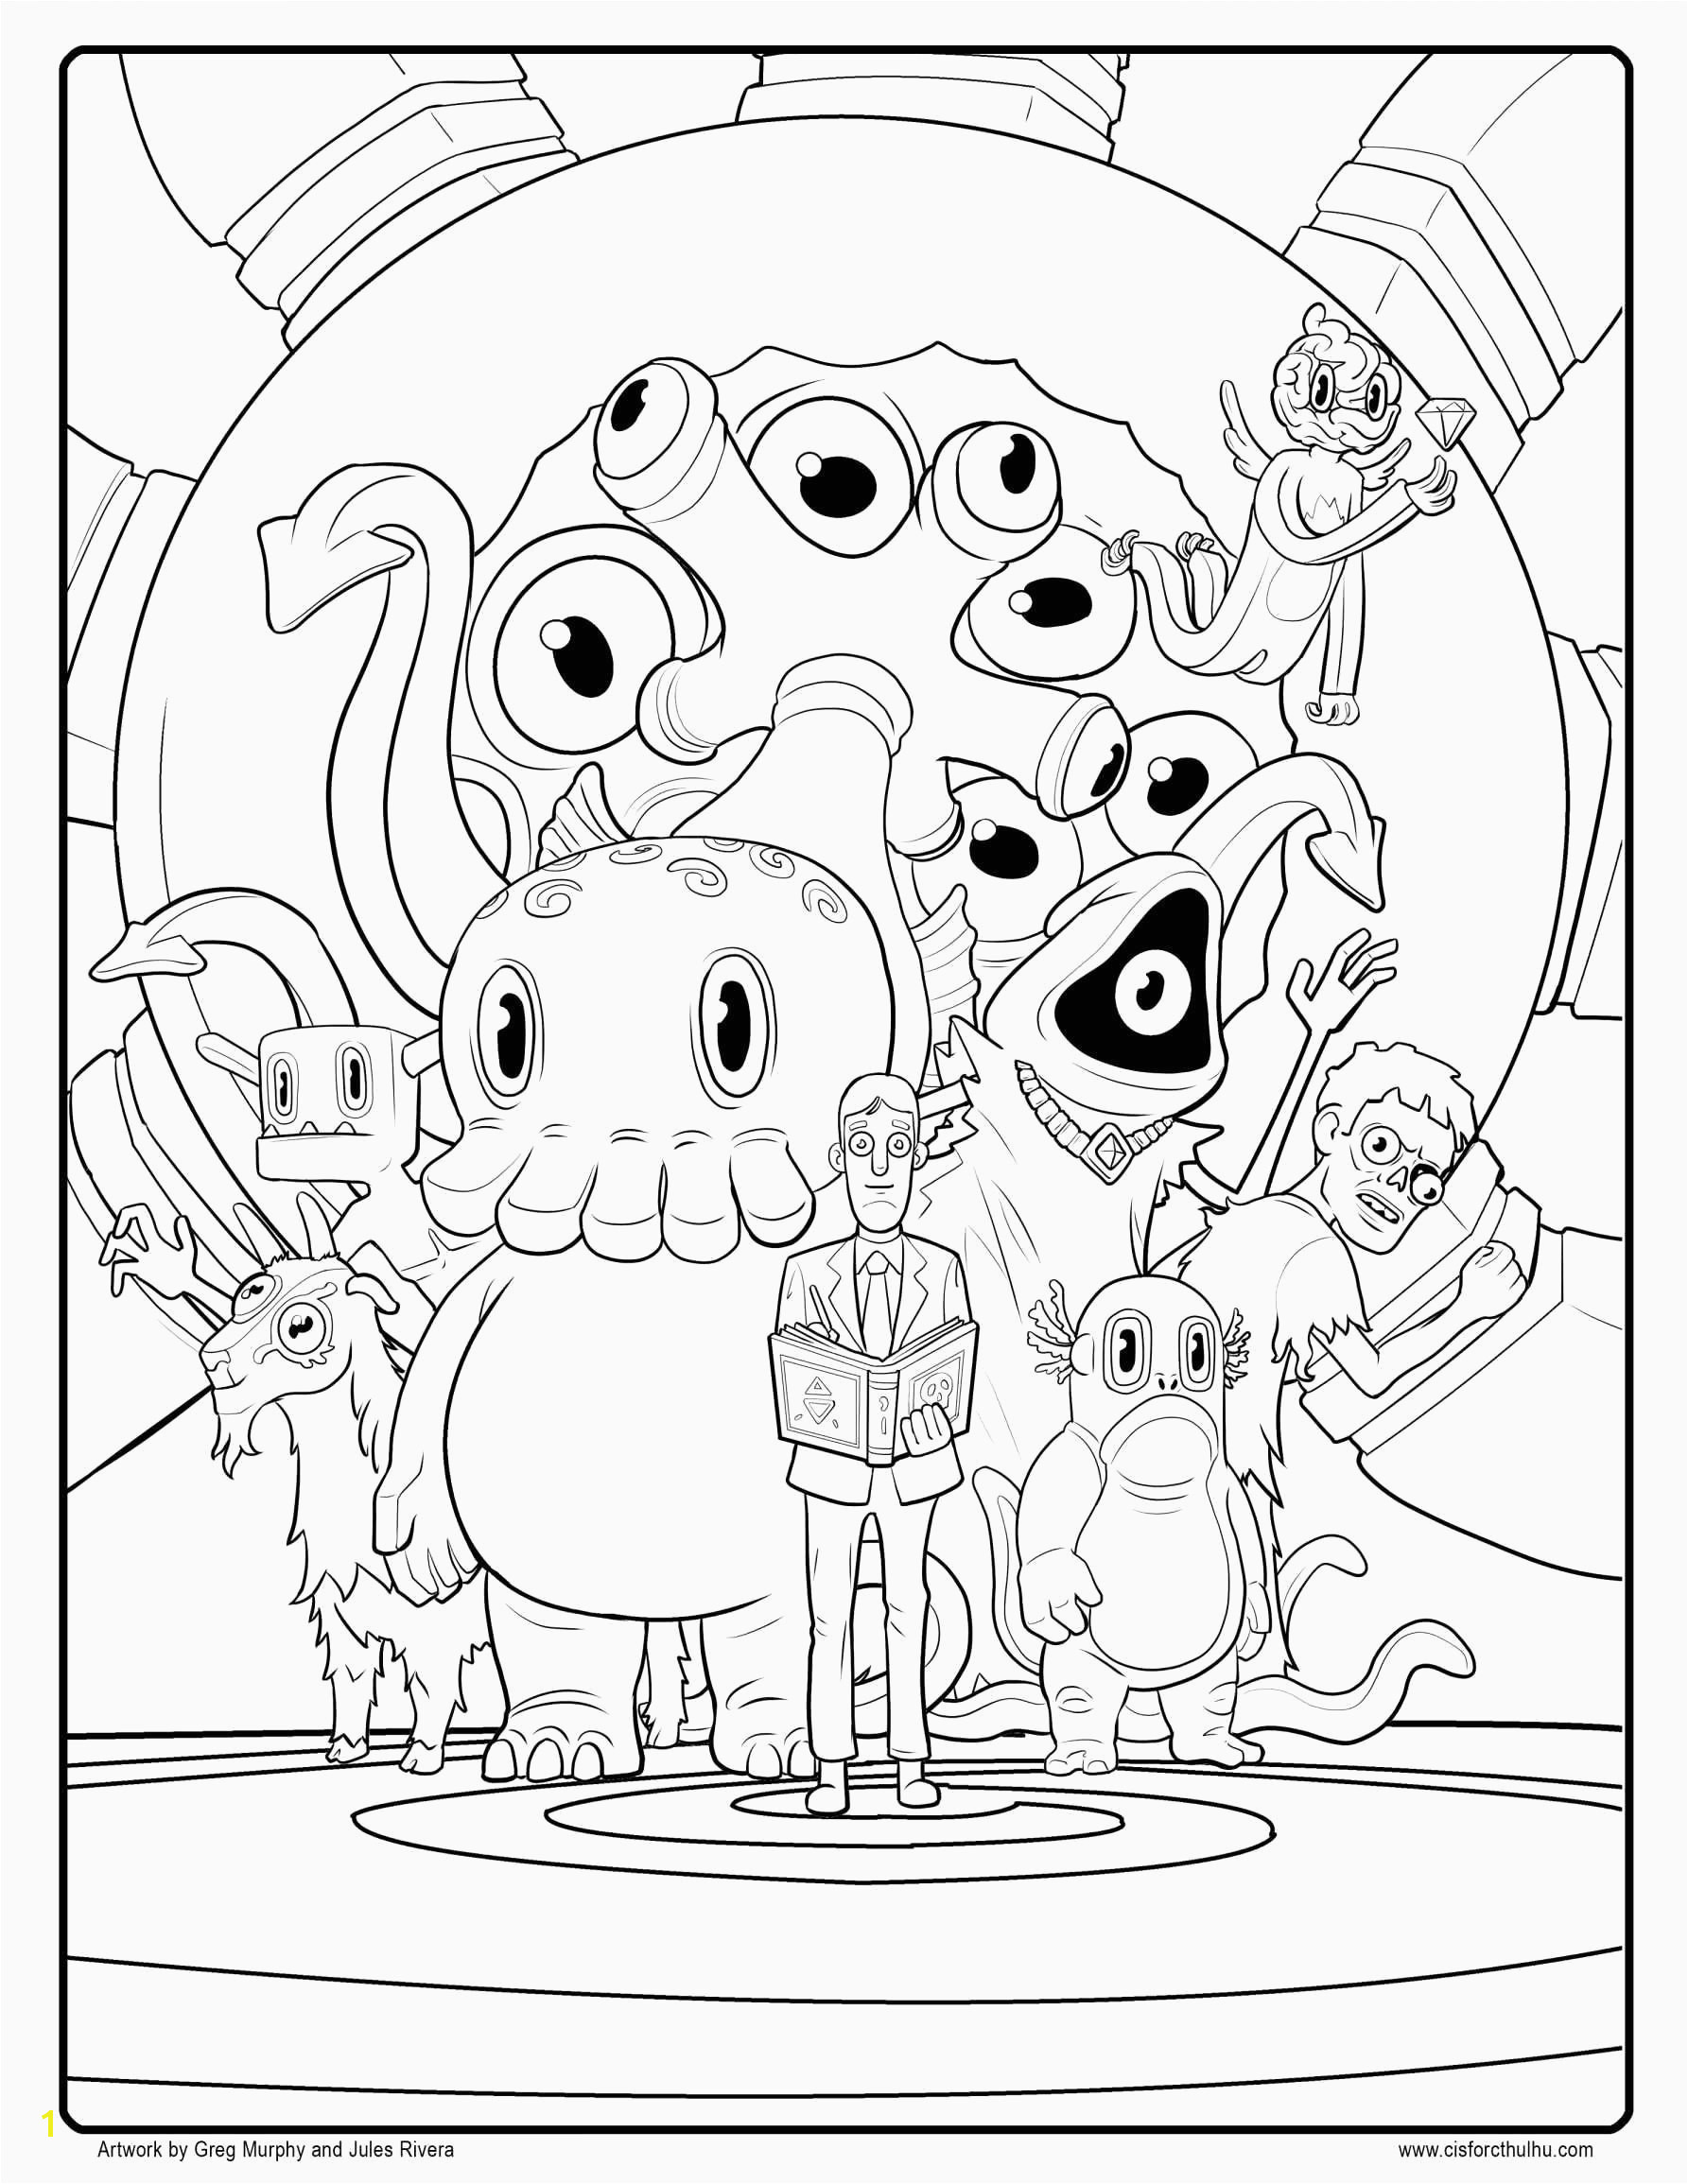 Christmas Coloring Page for Adults